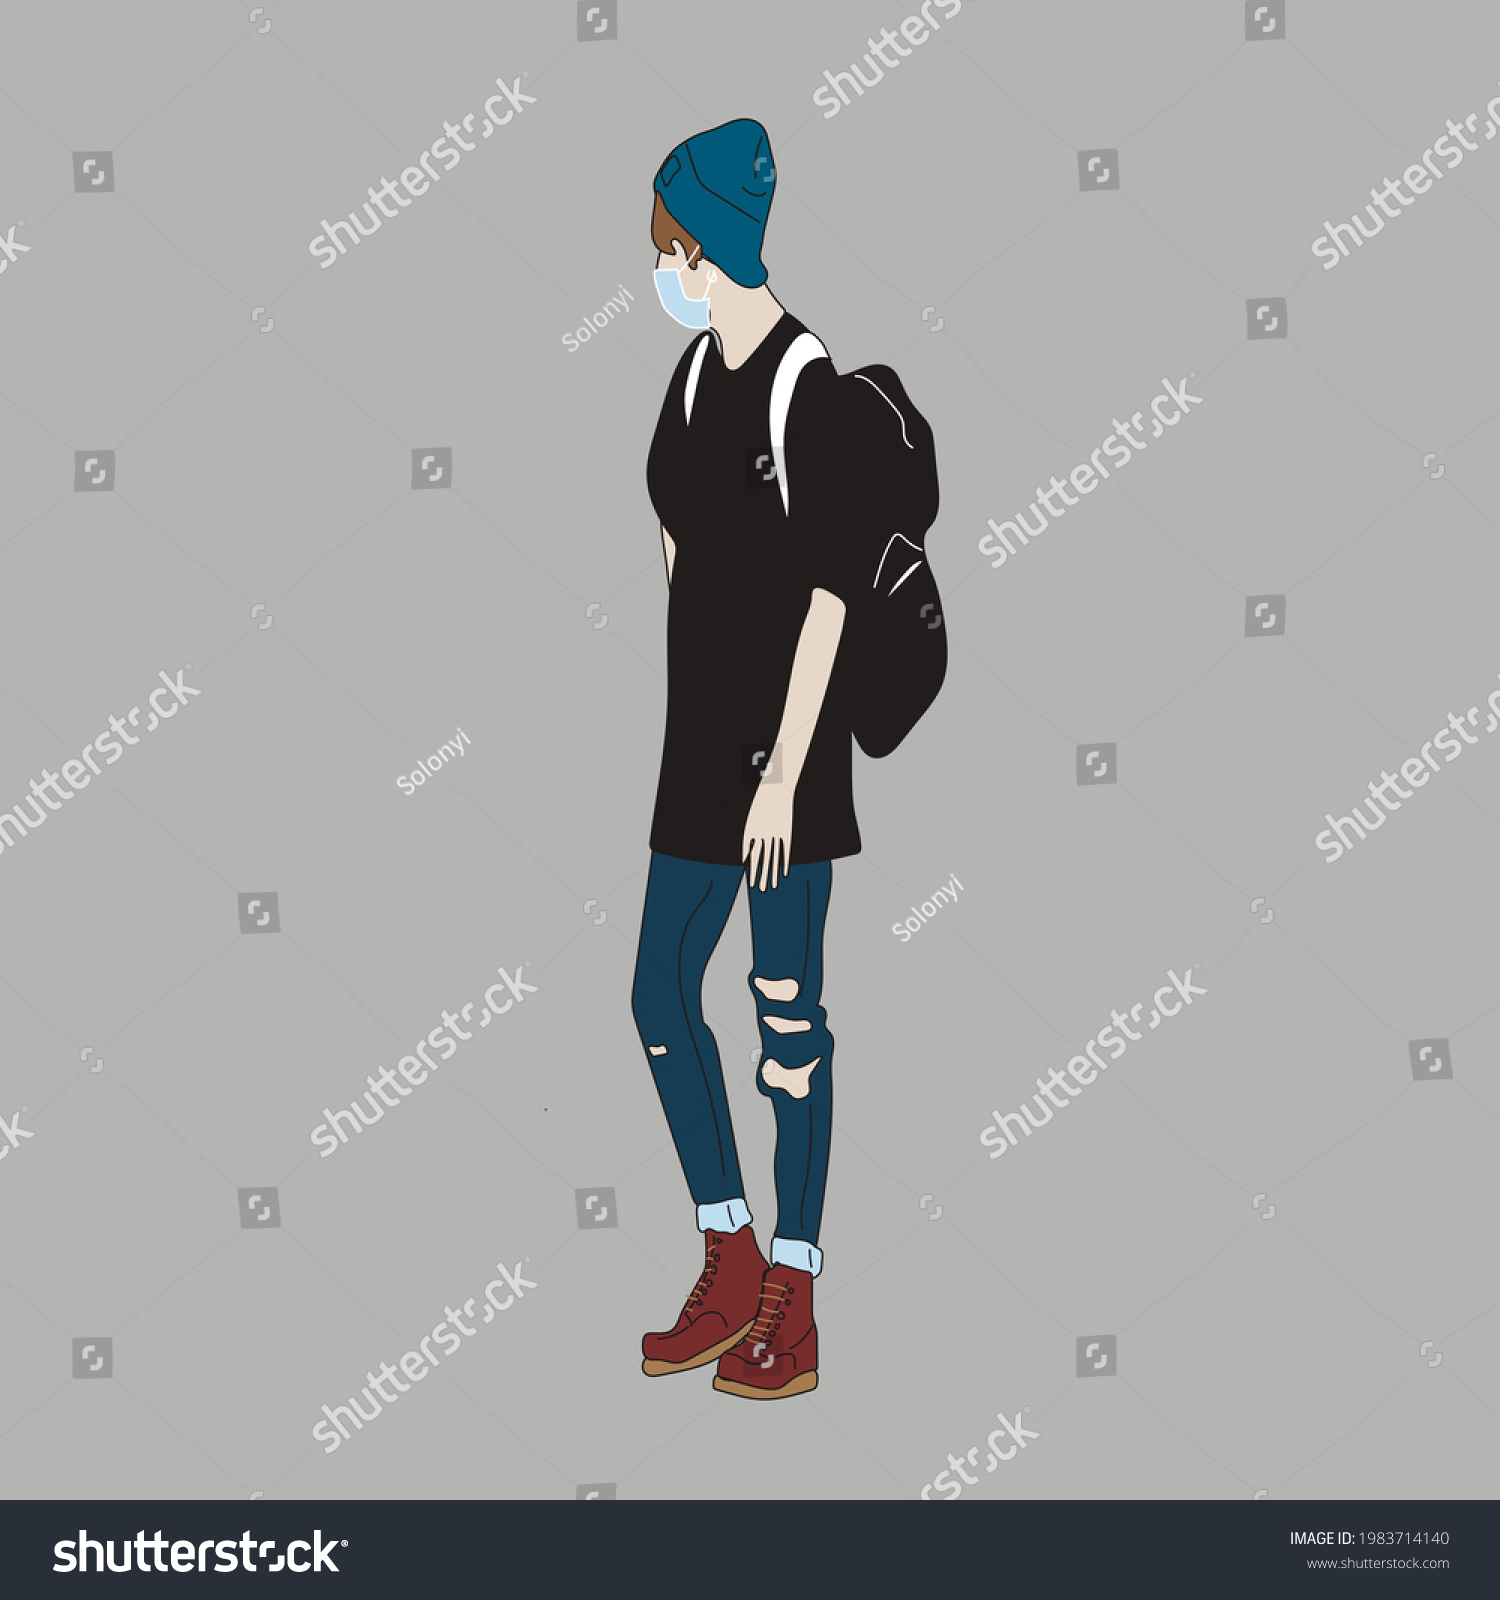 SVG of Vector illustration of Kpop street fashion. Street idols of Koreans. Kpop men's fashion idol. A guy in a black T-shirt and blue jeans. svg